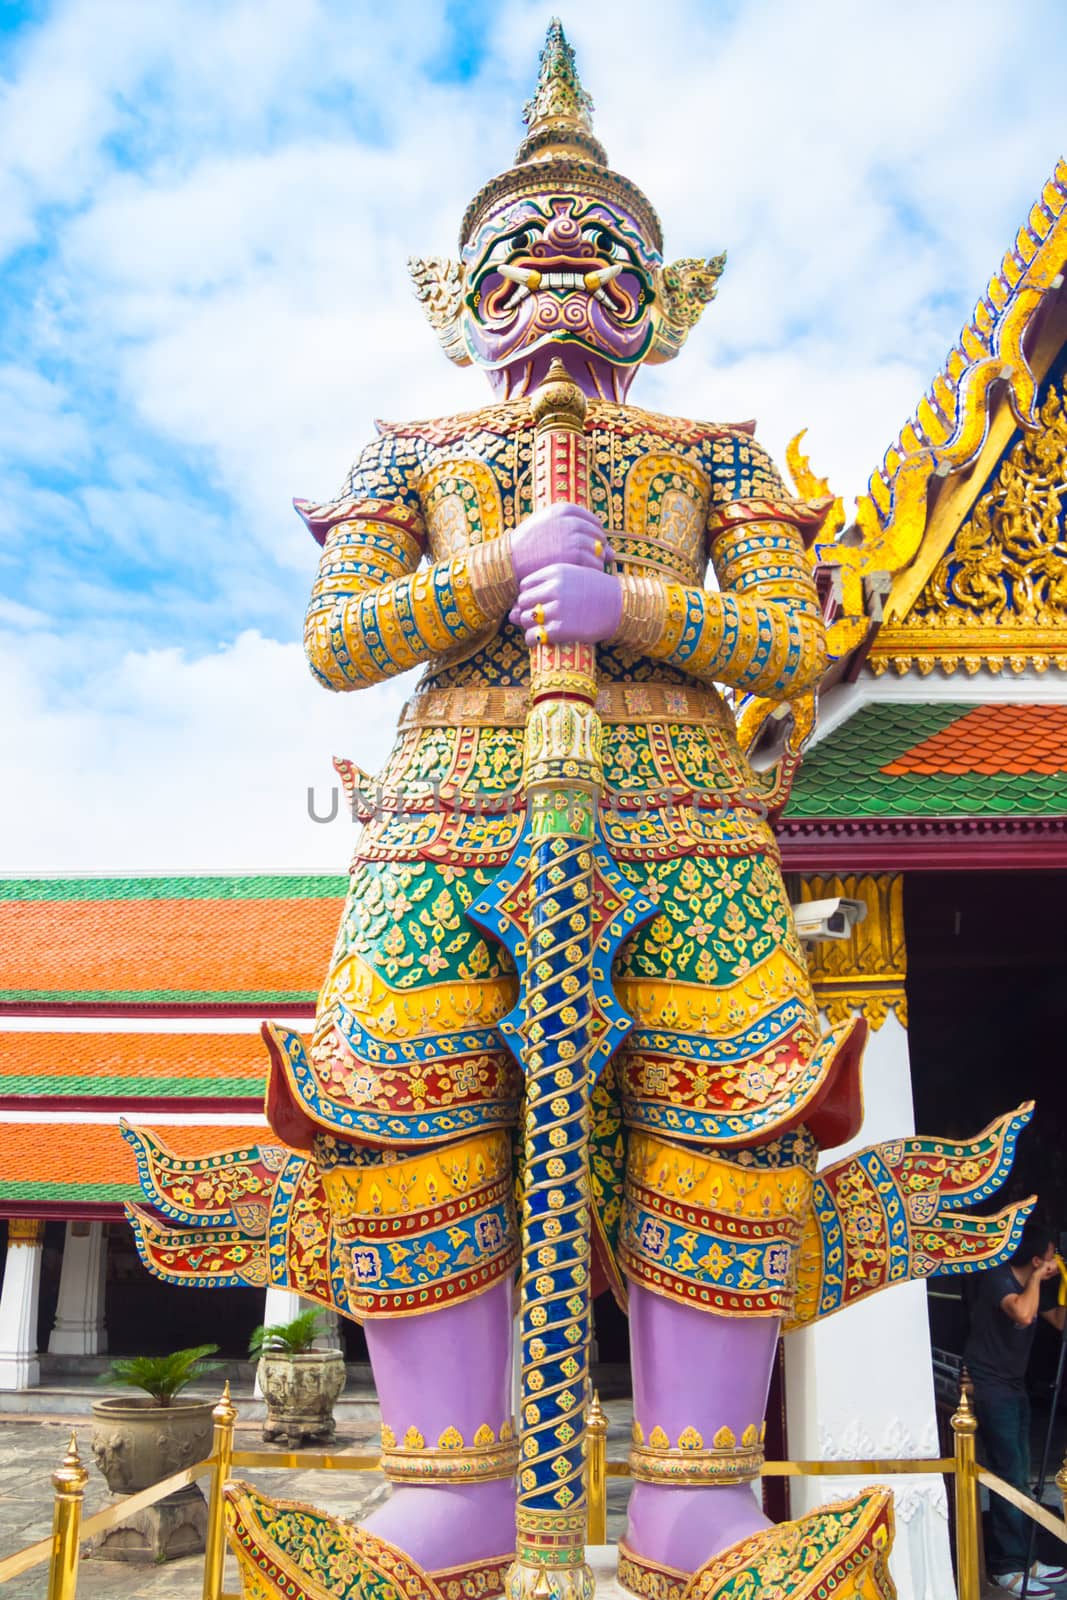 Giant statue in Wat Phra Kaew, Temple of the Emerald Buddha, full official name Wat Phra Si Rattana Satsadaram, is regarded as the most sacred Buddhist temple (wat) in Bangkok, Thailand.